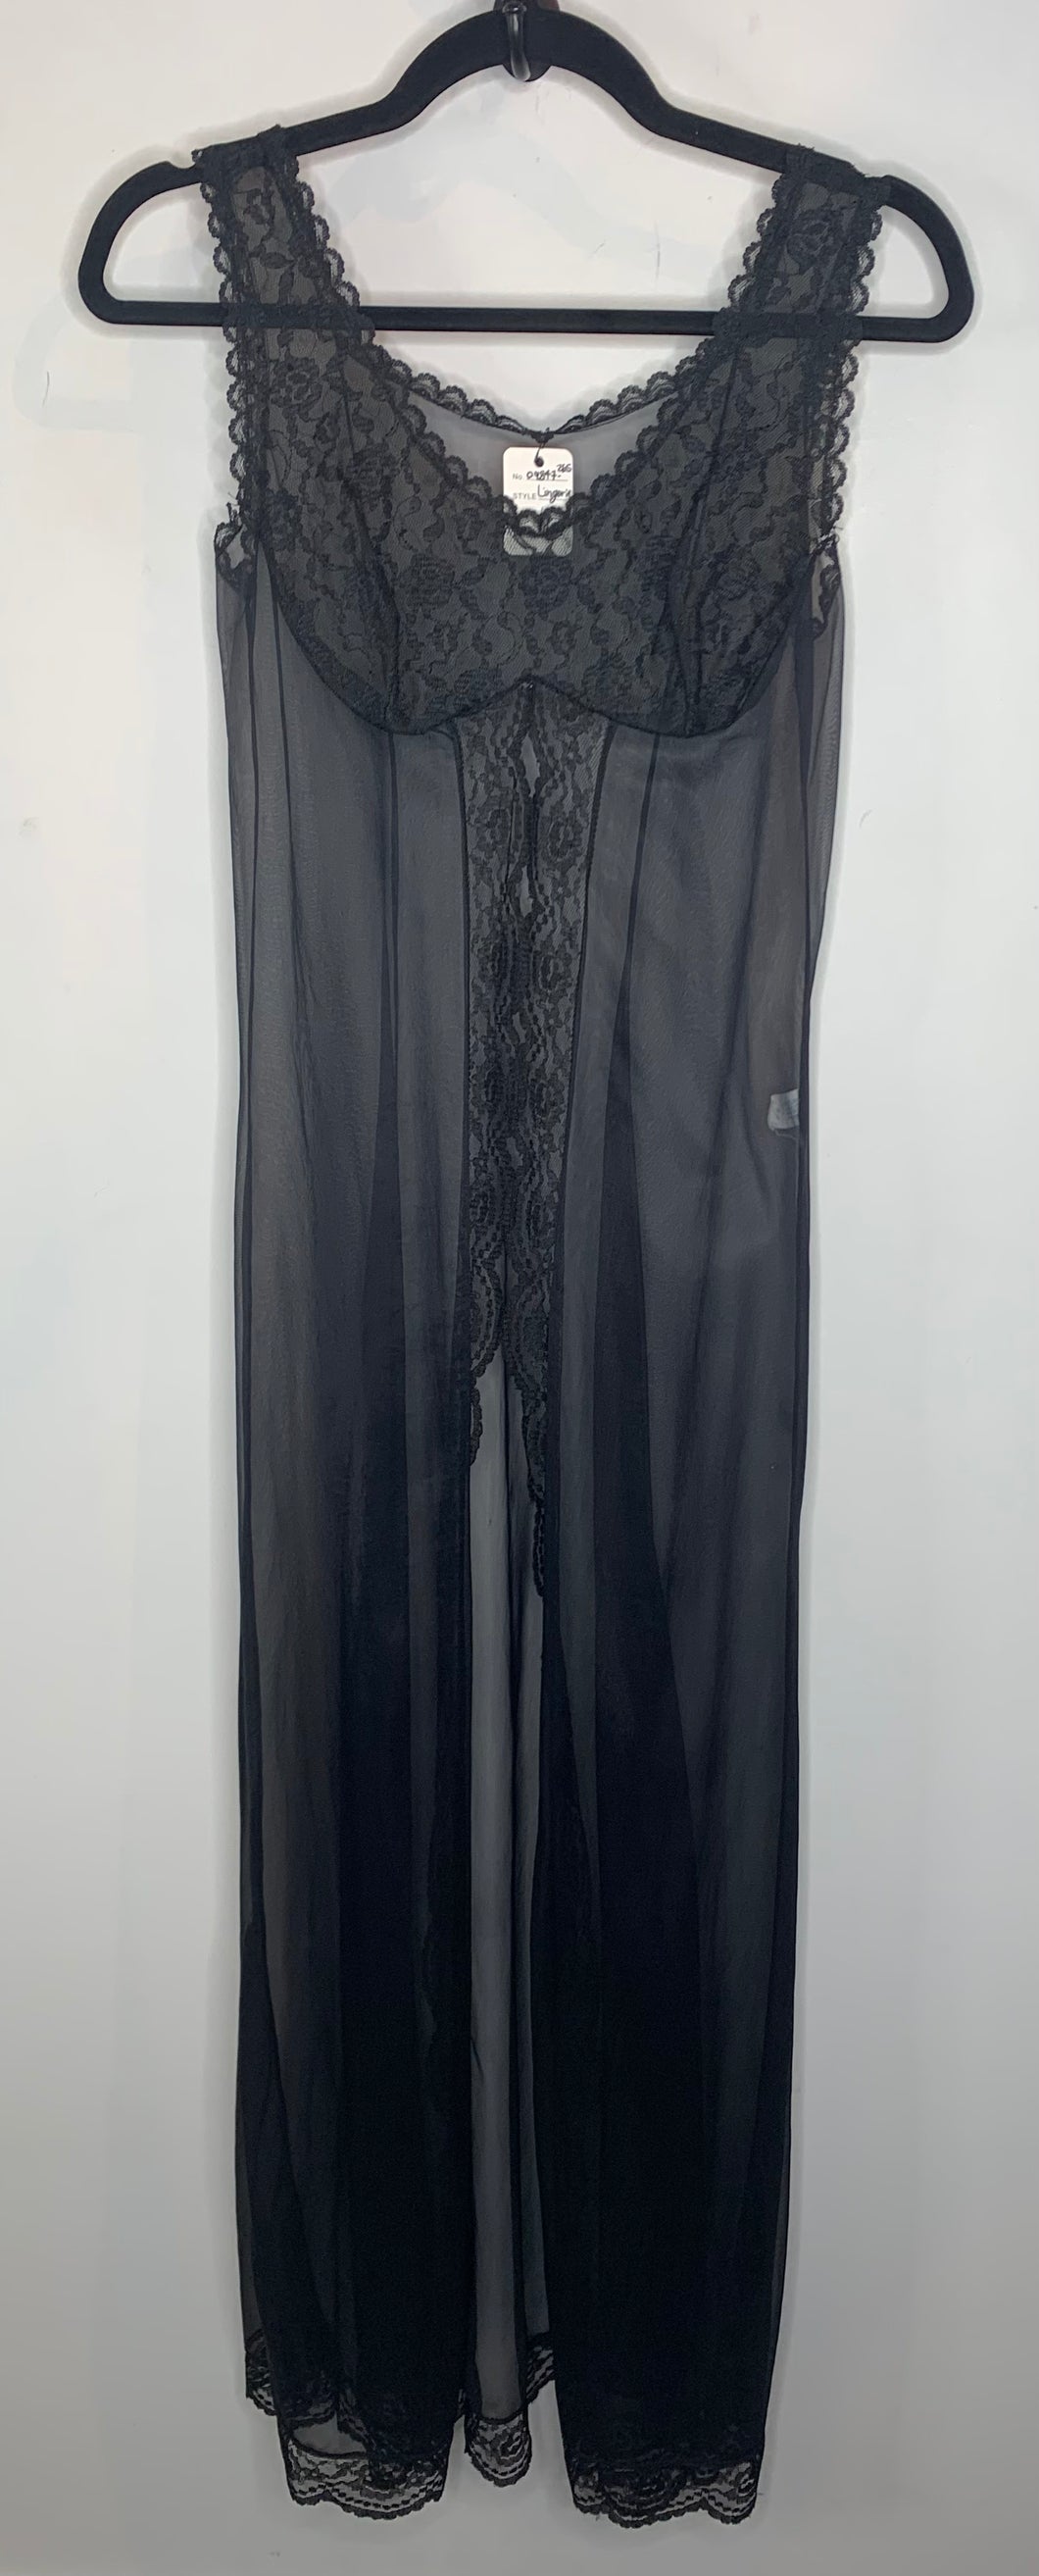 Sheer Black Lacy Lingerie with Open Front – Curve Appeal Consignment